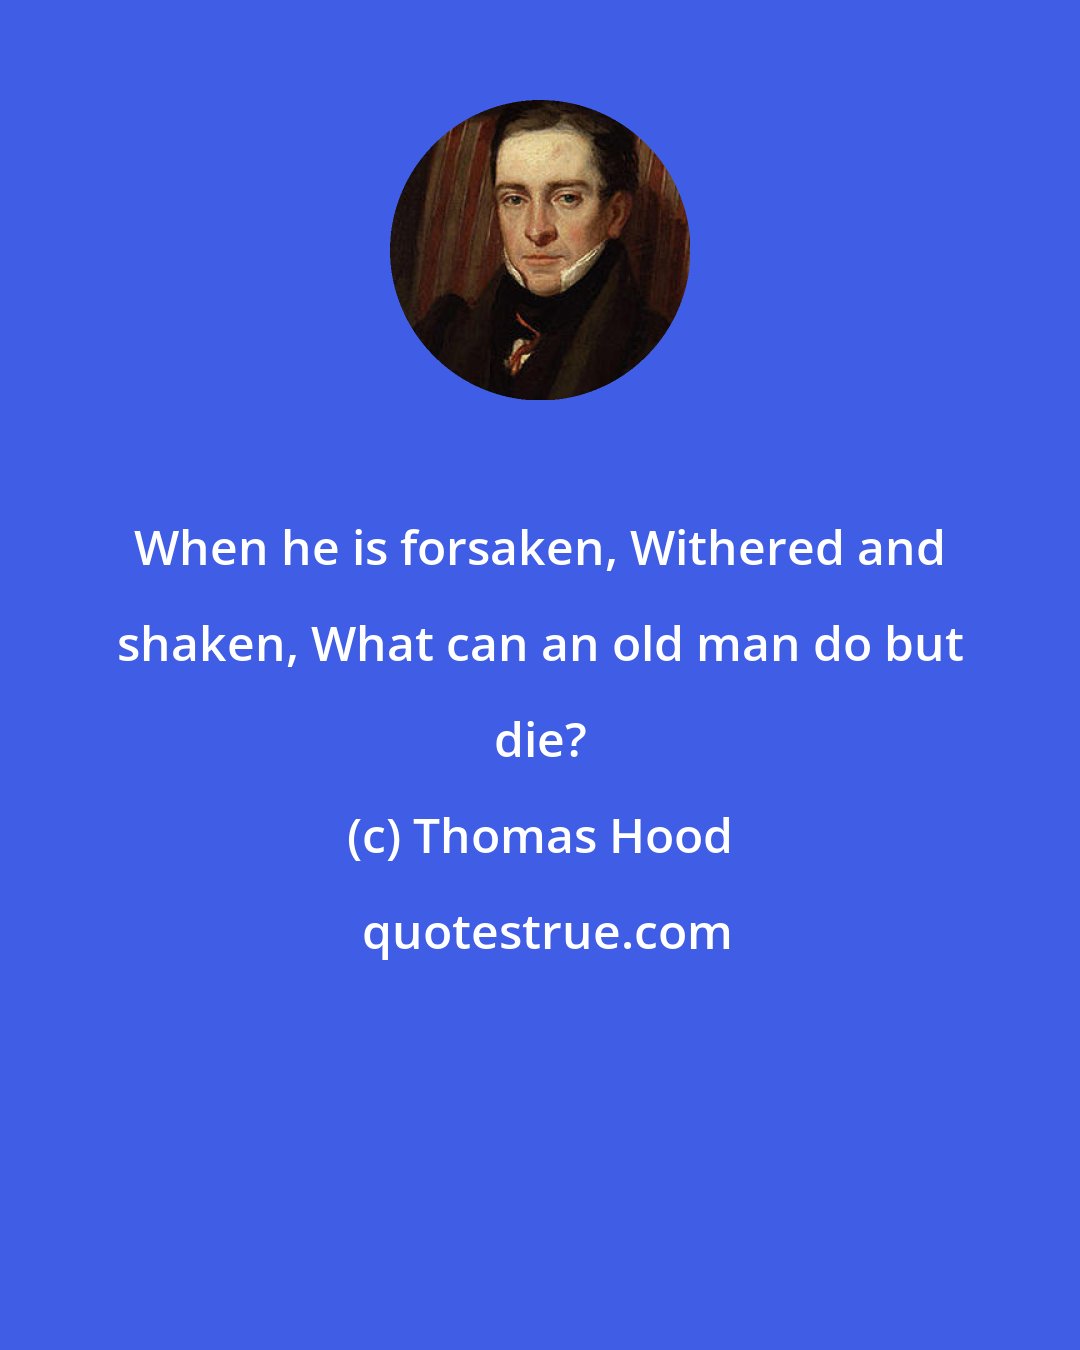 Thomas Hood: When he is forsaken, Withered and shaken, What can an old man do but die?